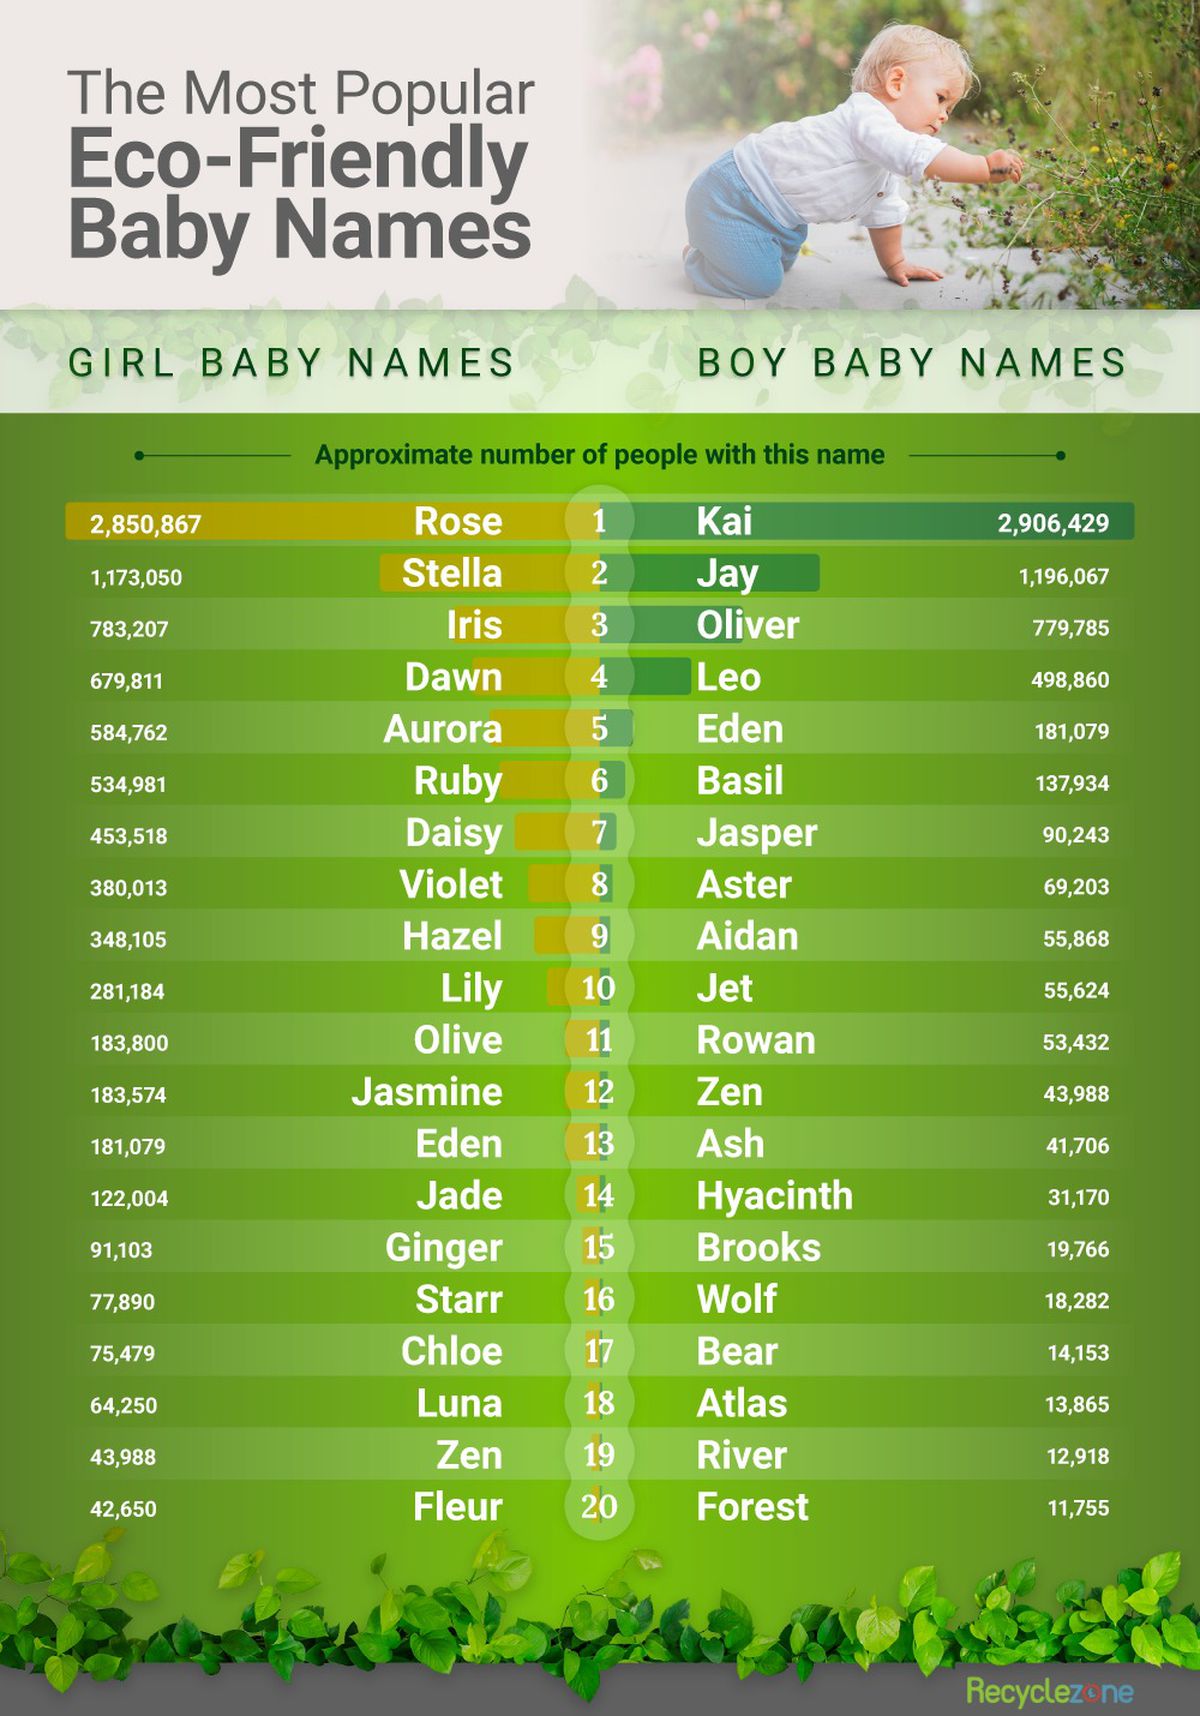 The most baby names, according to a study | Shropshire Star